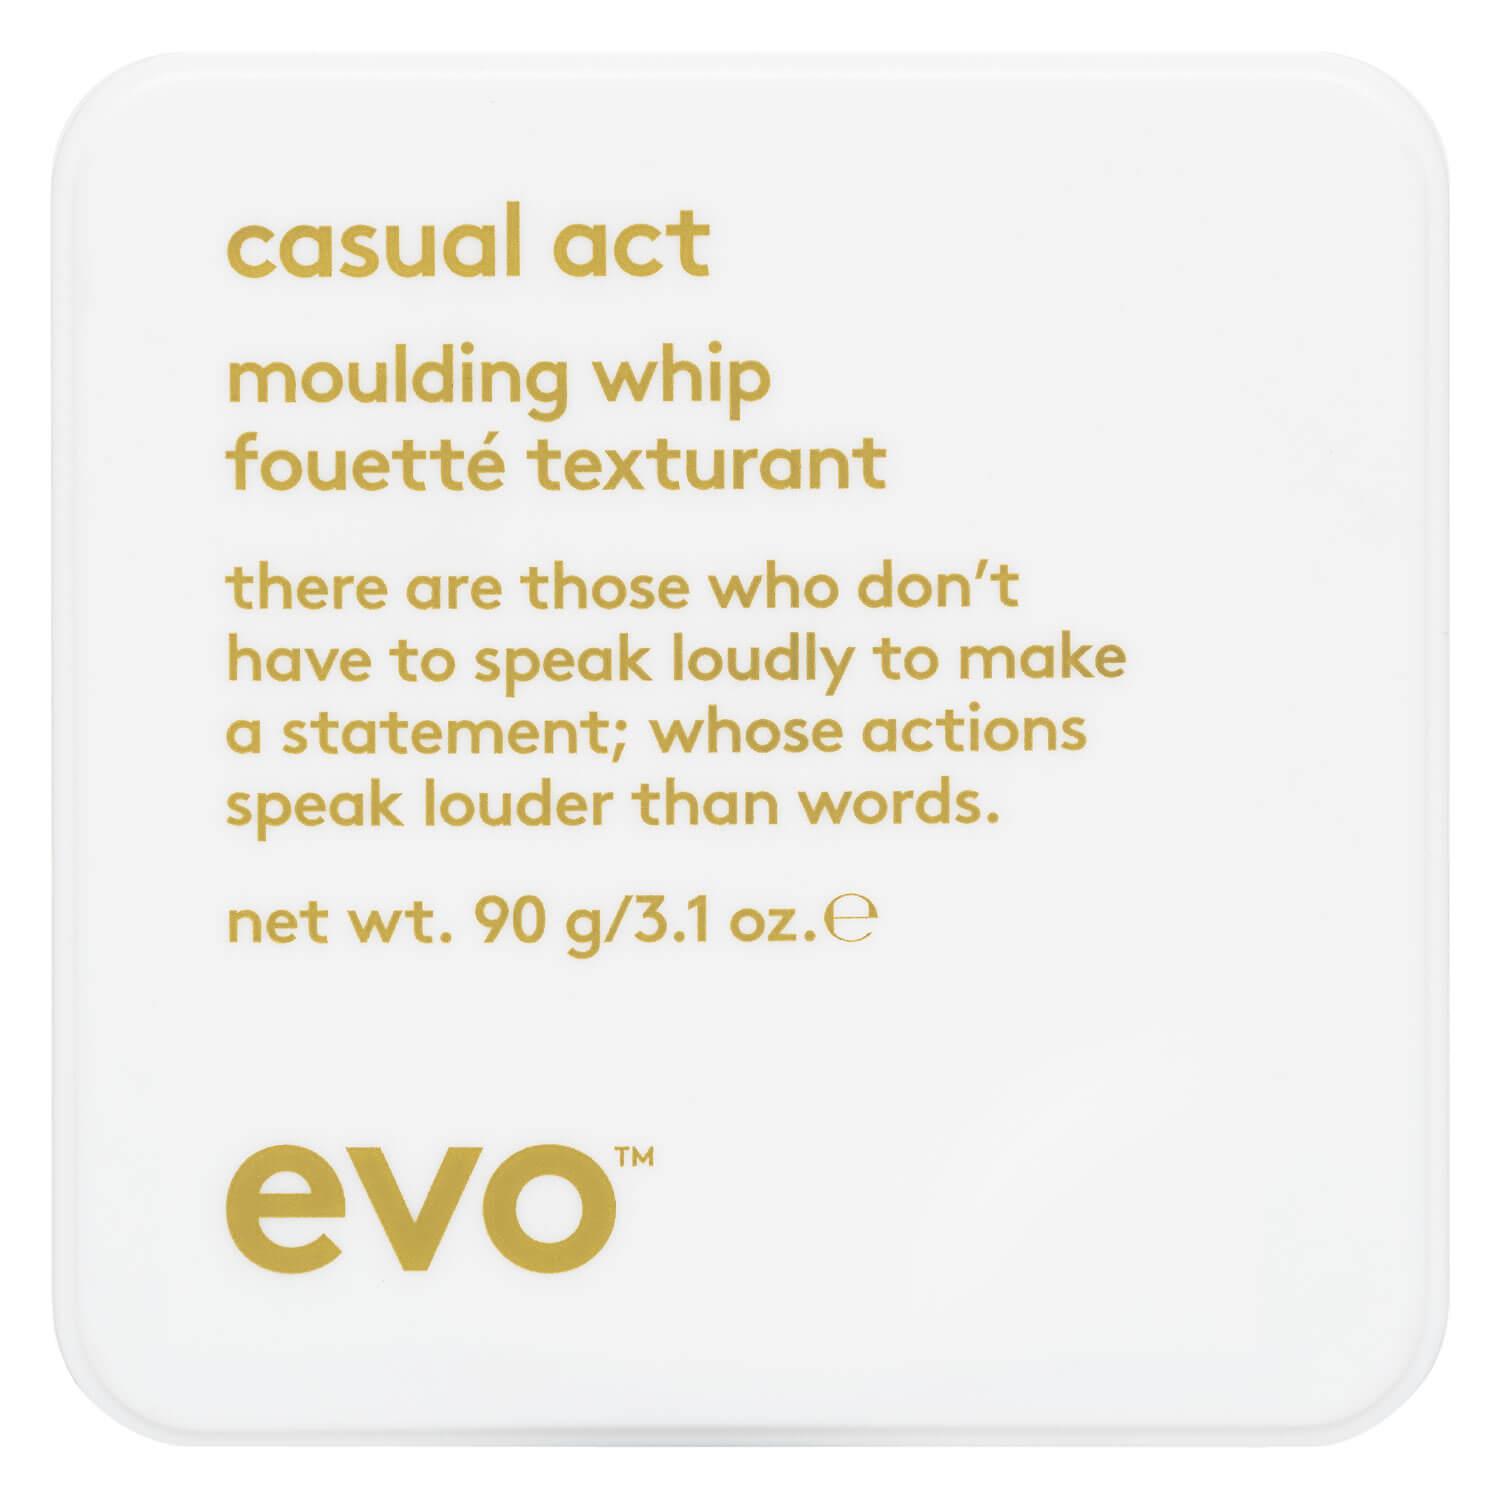 evo style - casual act moulding whip